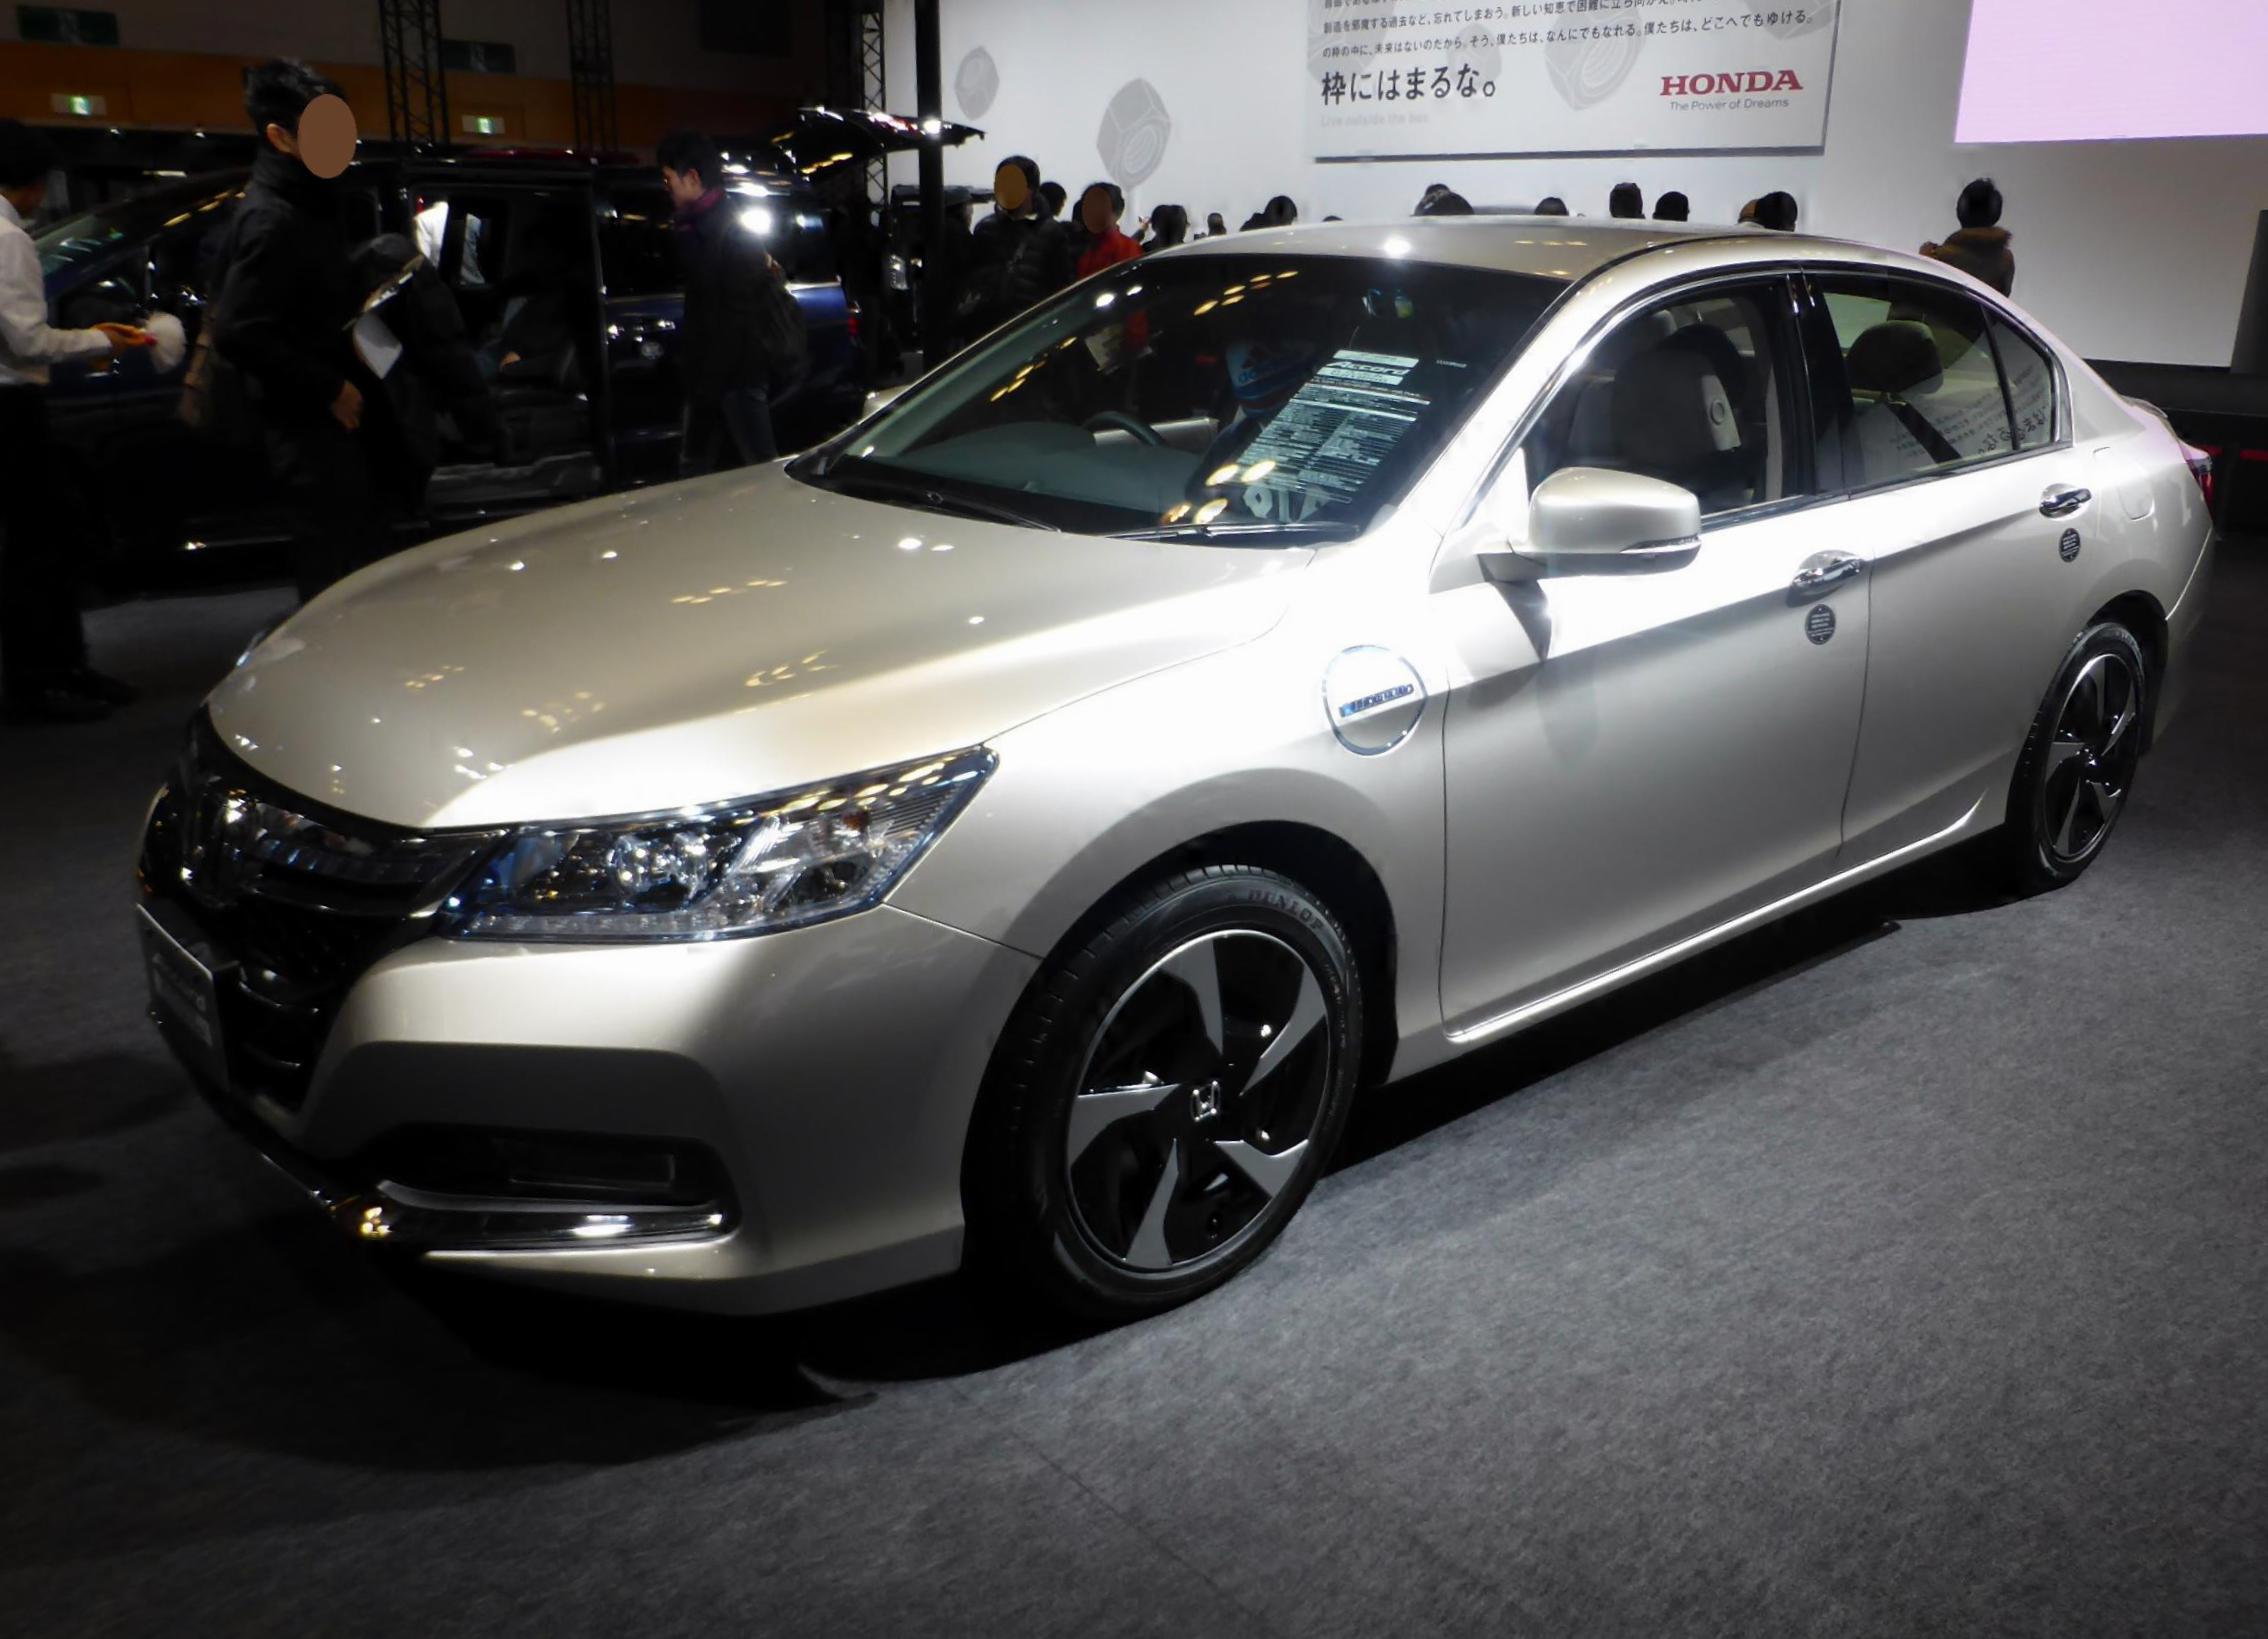 Accord Plug-In Hybrid Honda for sale coupe